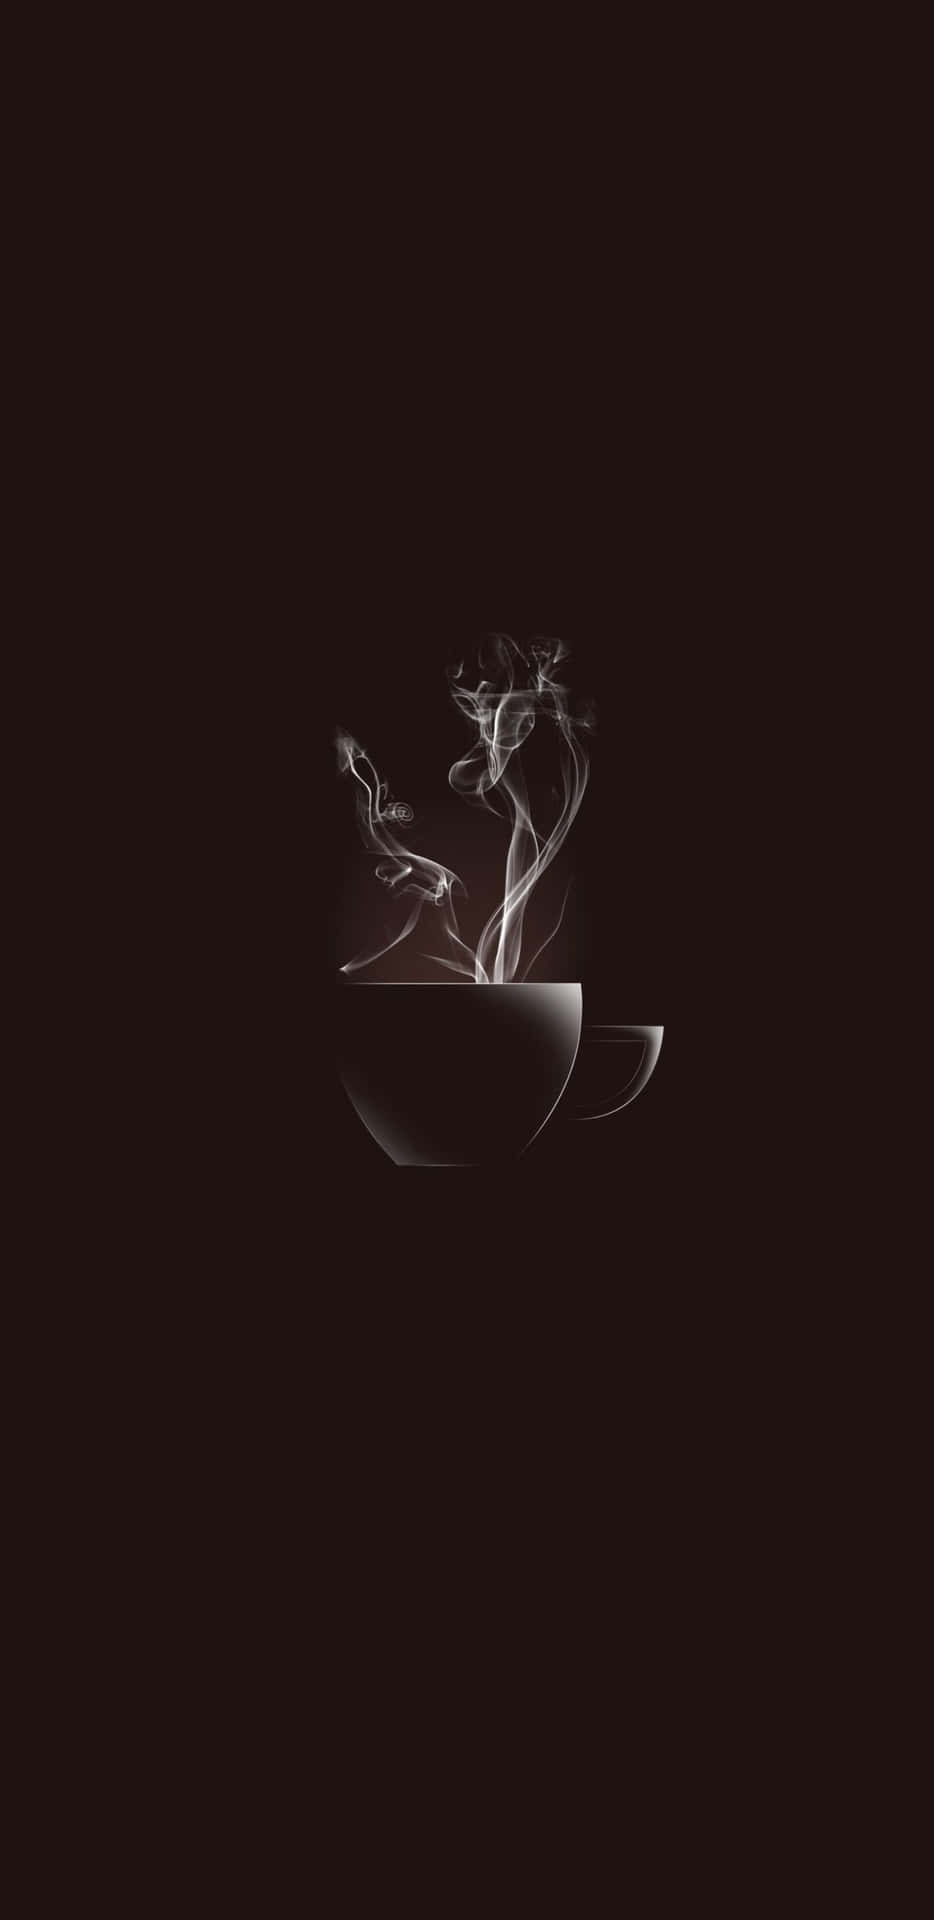 Simple yet Artistic Coffee Moment Wallpaper